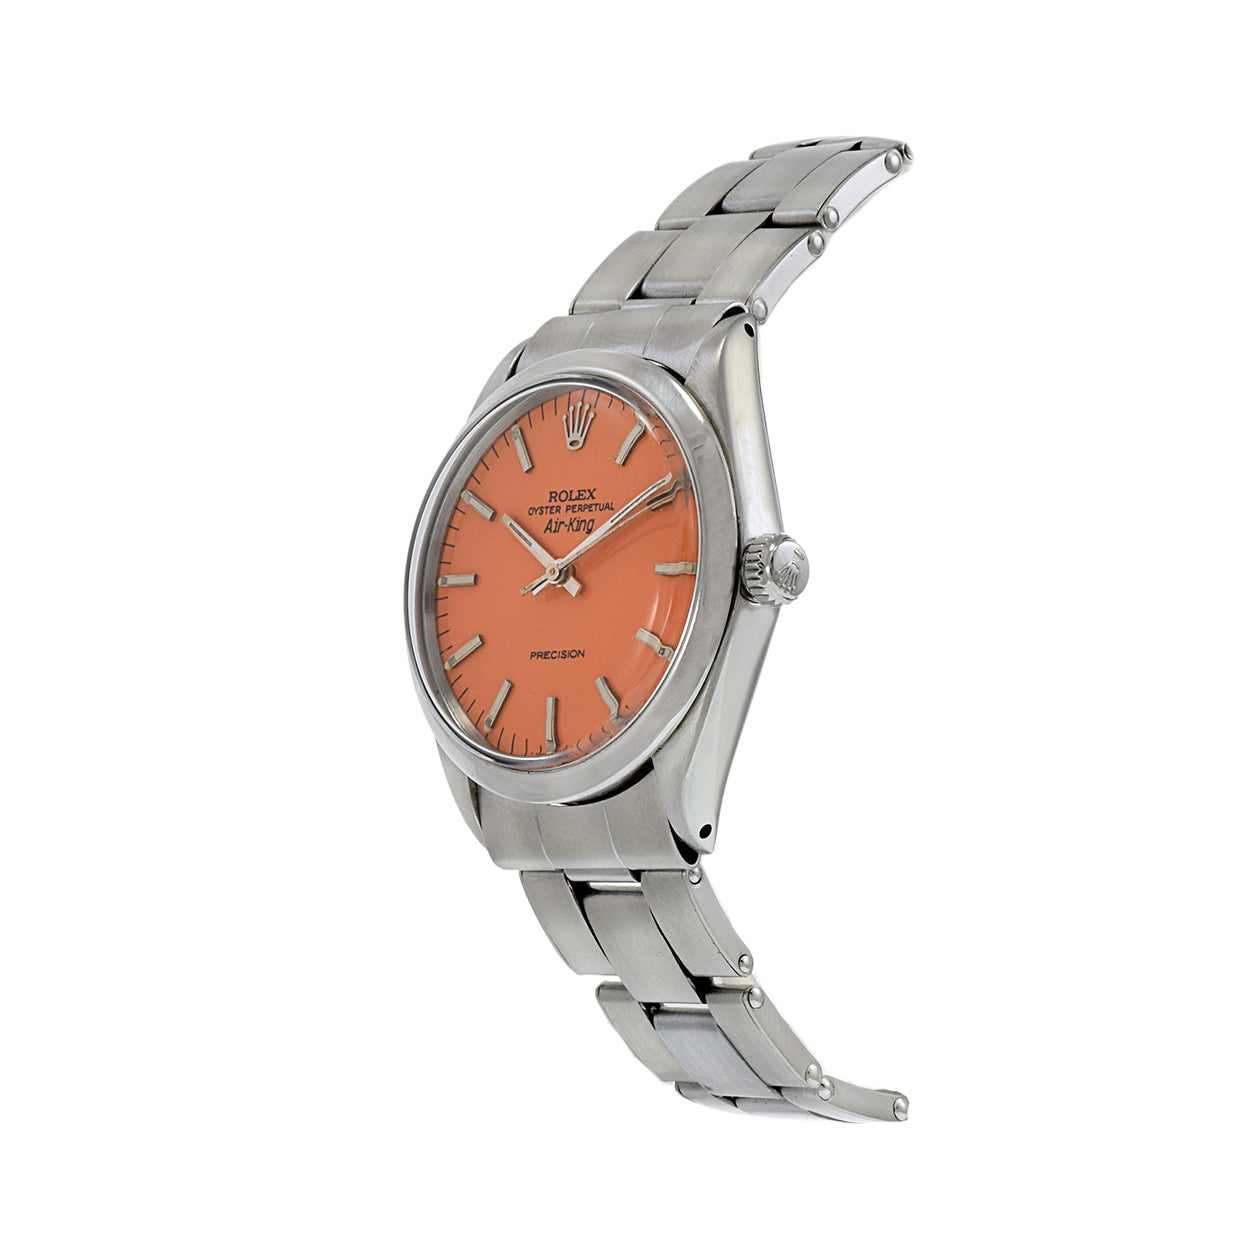 Vintage 1963 Rolex Air-King Reference 5500 Custom Orange Dial Automatic Watch